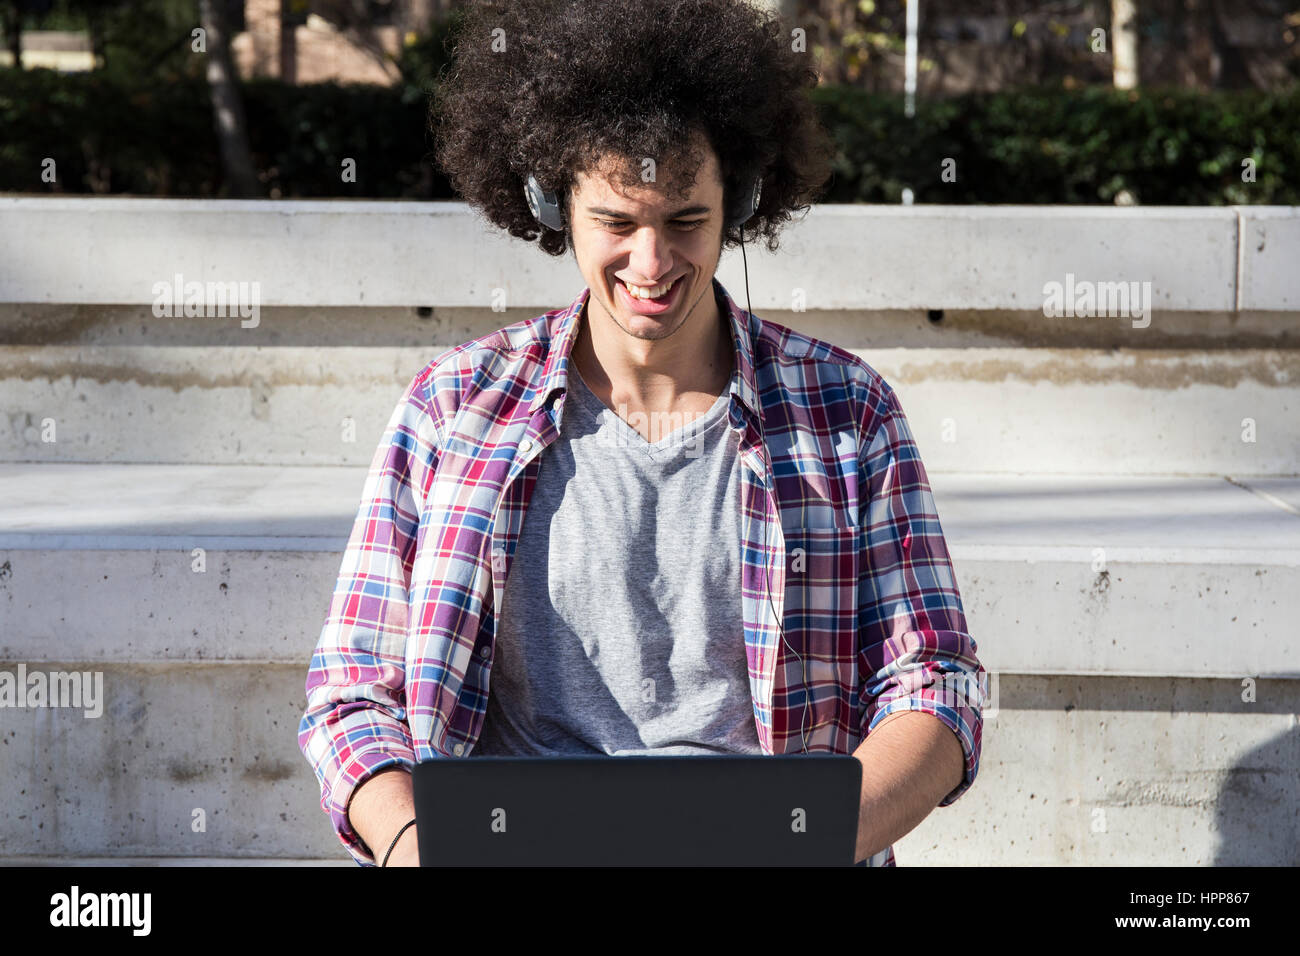 Smiling young man using laptop and headphones Stock Photo